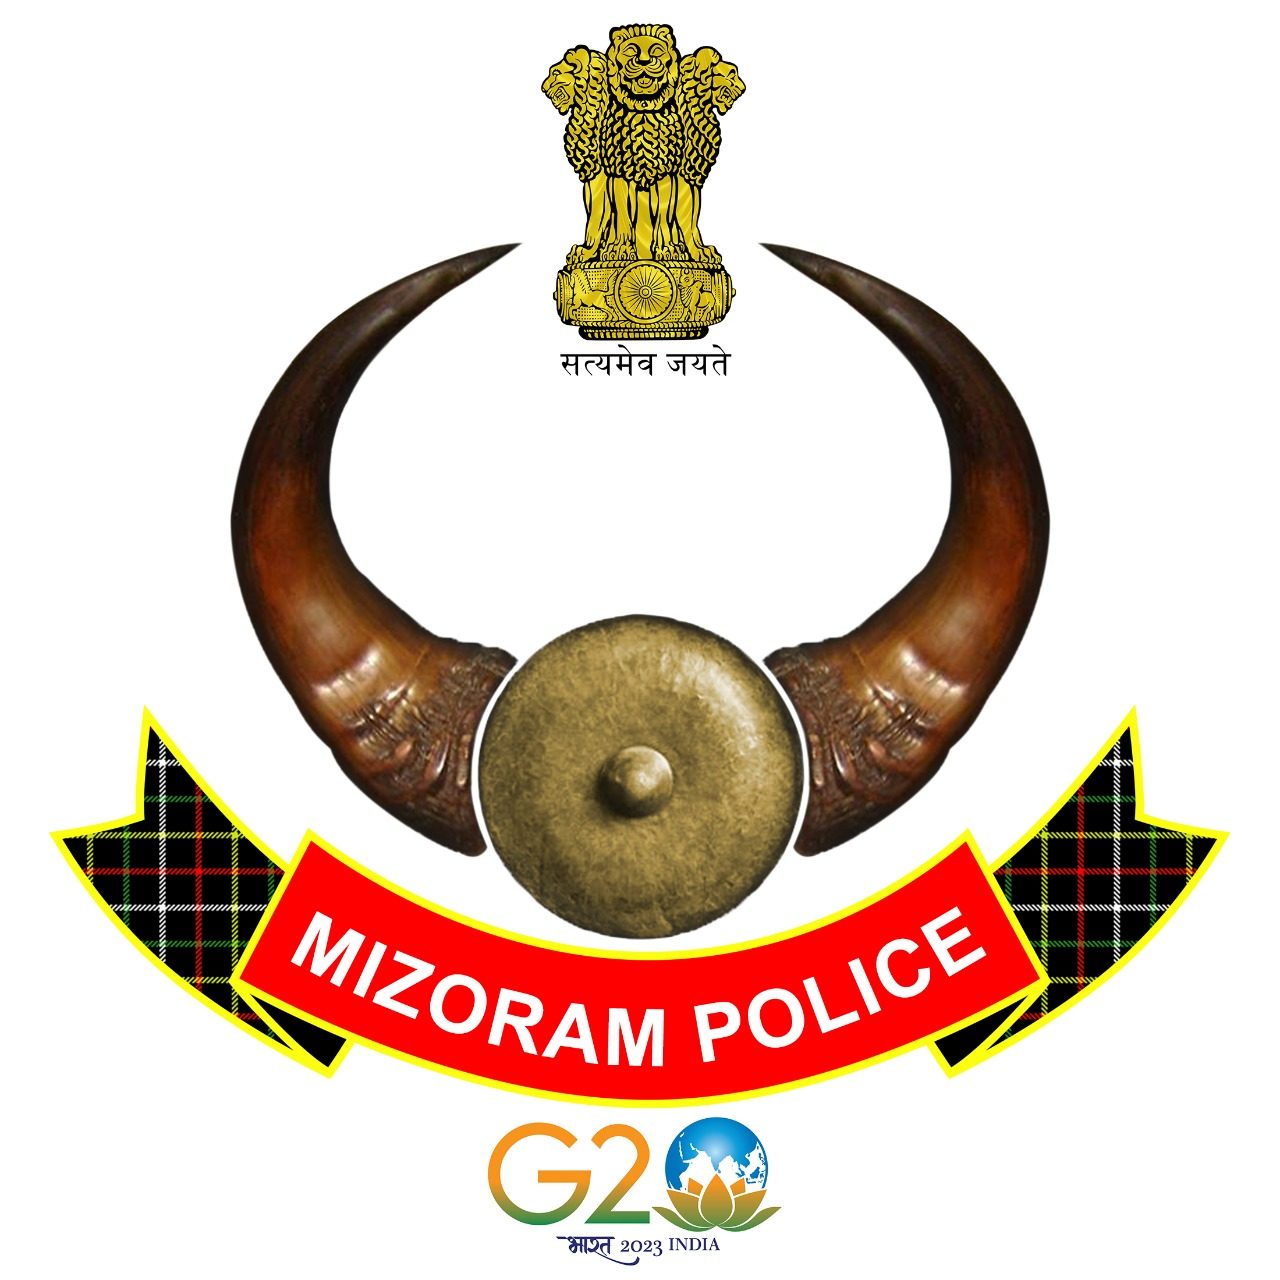 Mizoram Police Exam, Recruitment | Model Papers, Result, Dates, Vacancies, Selection, Admit Card, Question Paper and Exam Pattern